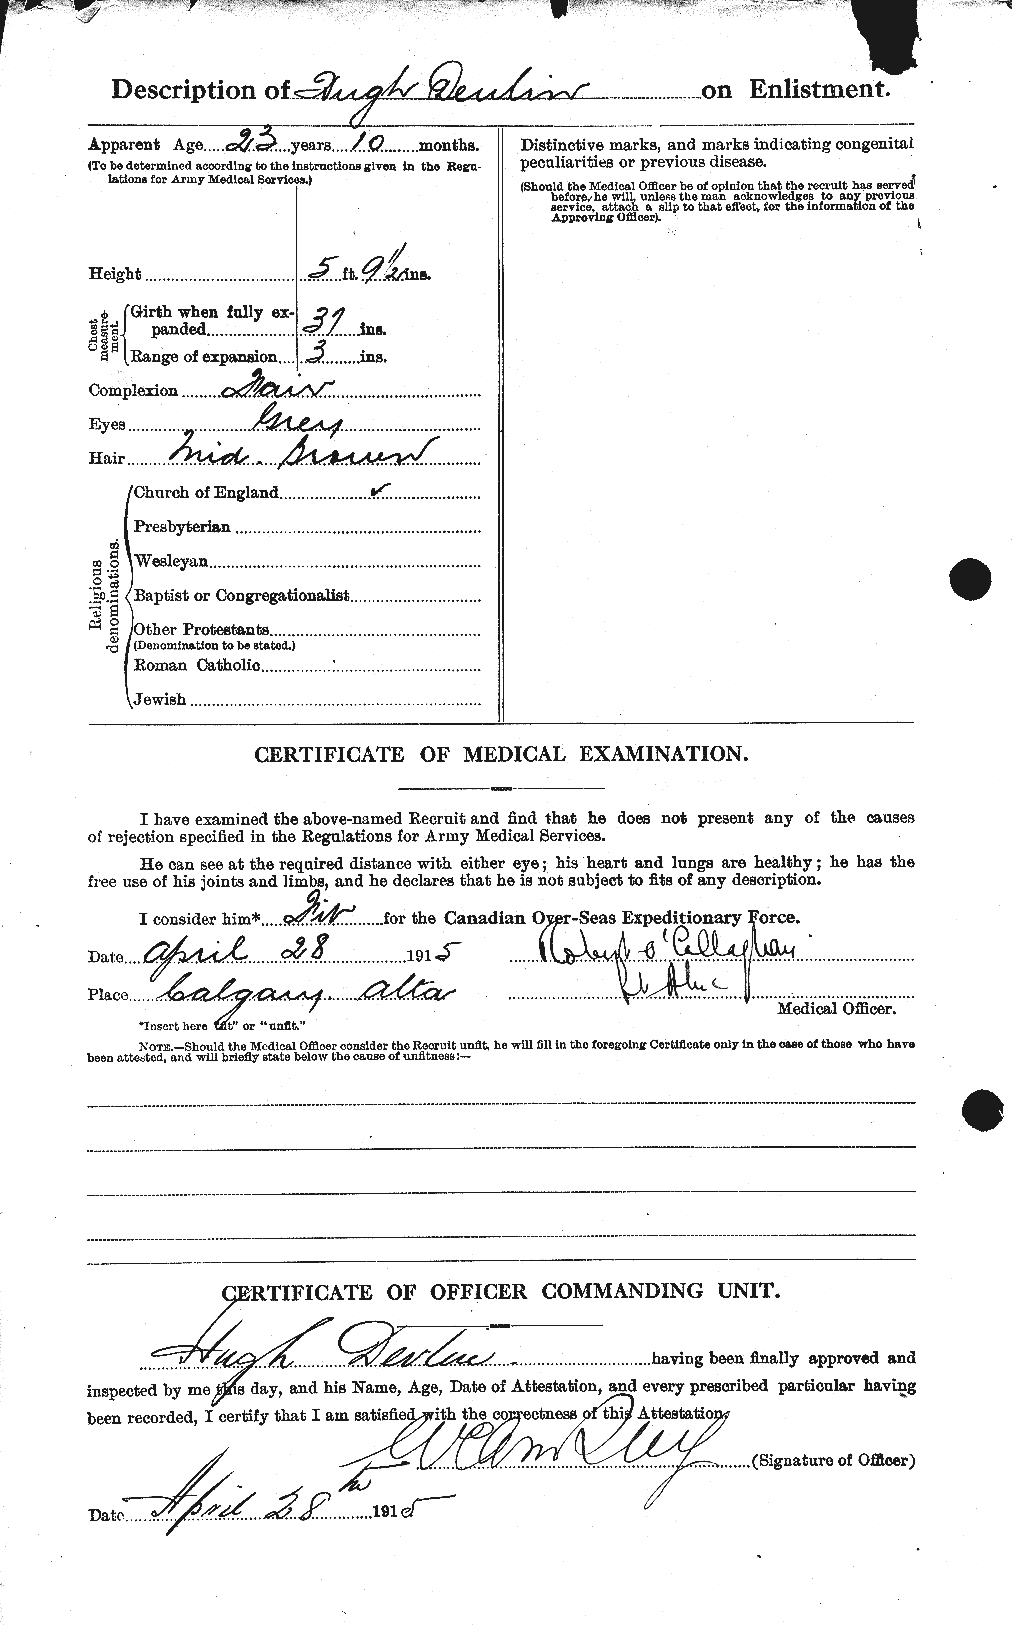 Personnel Records of the First World War - CEF 292184b